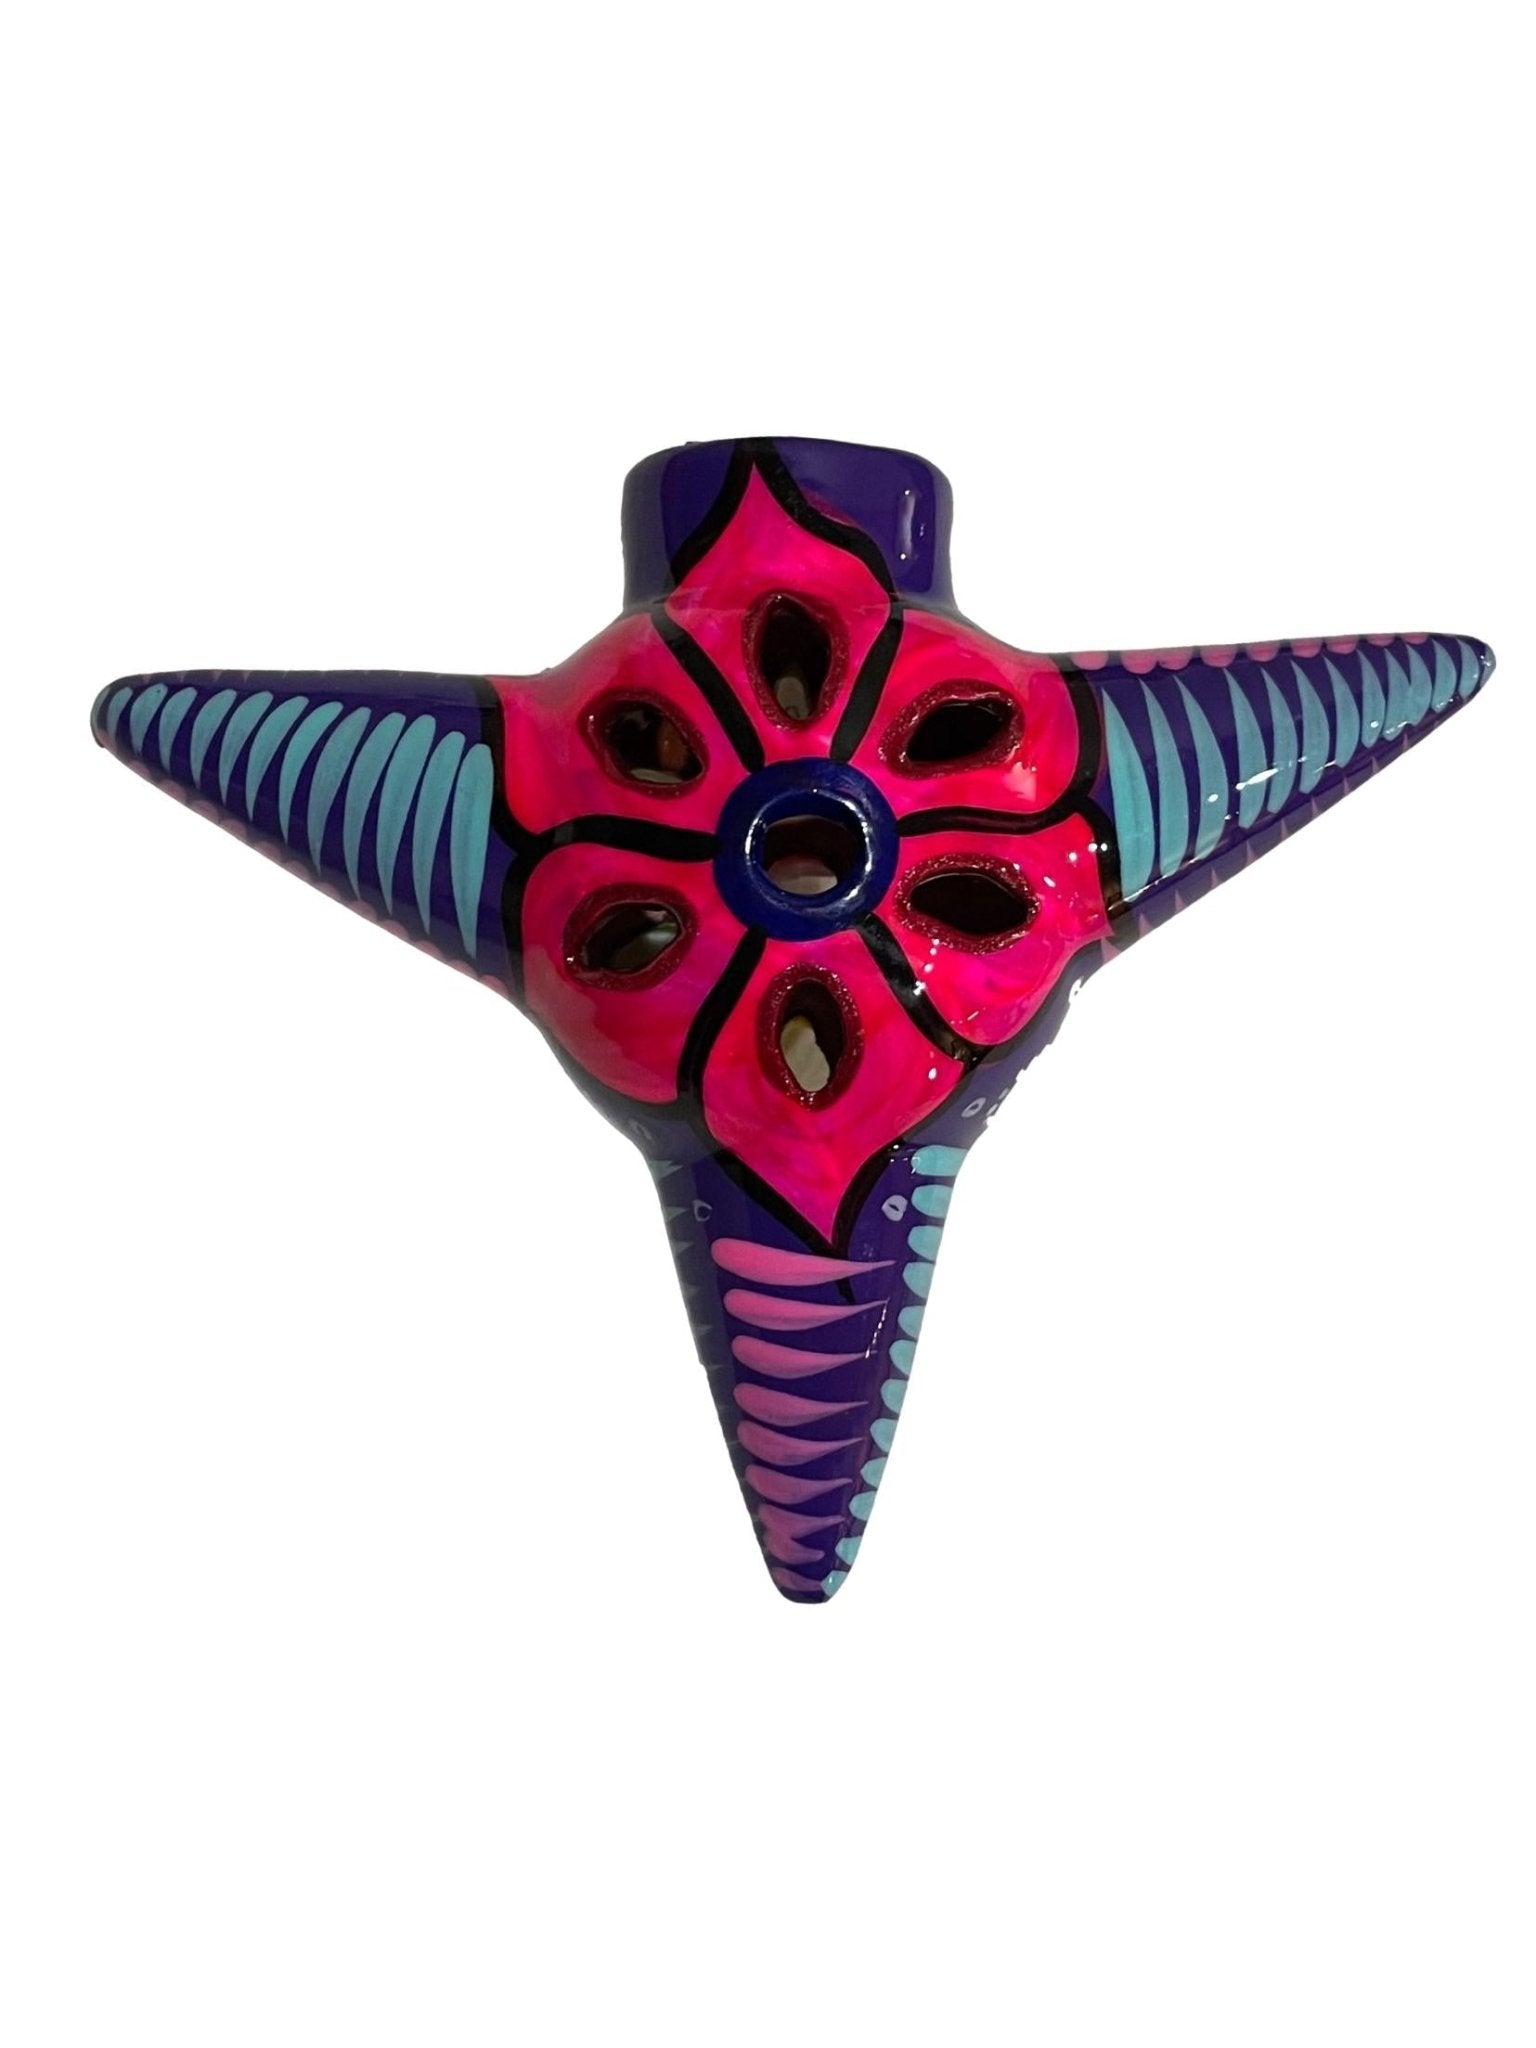 Ornament Ceramic 3 Point Star Handcrafted By Skilled Mexican Artisans - Ysleta Mission Gift Shop- VOTED El Paso's Best Gift Shop